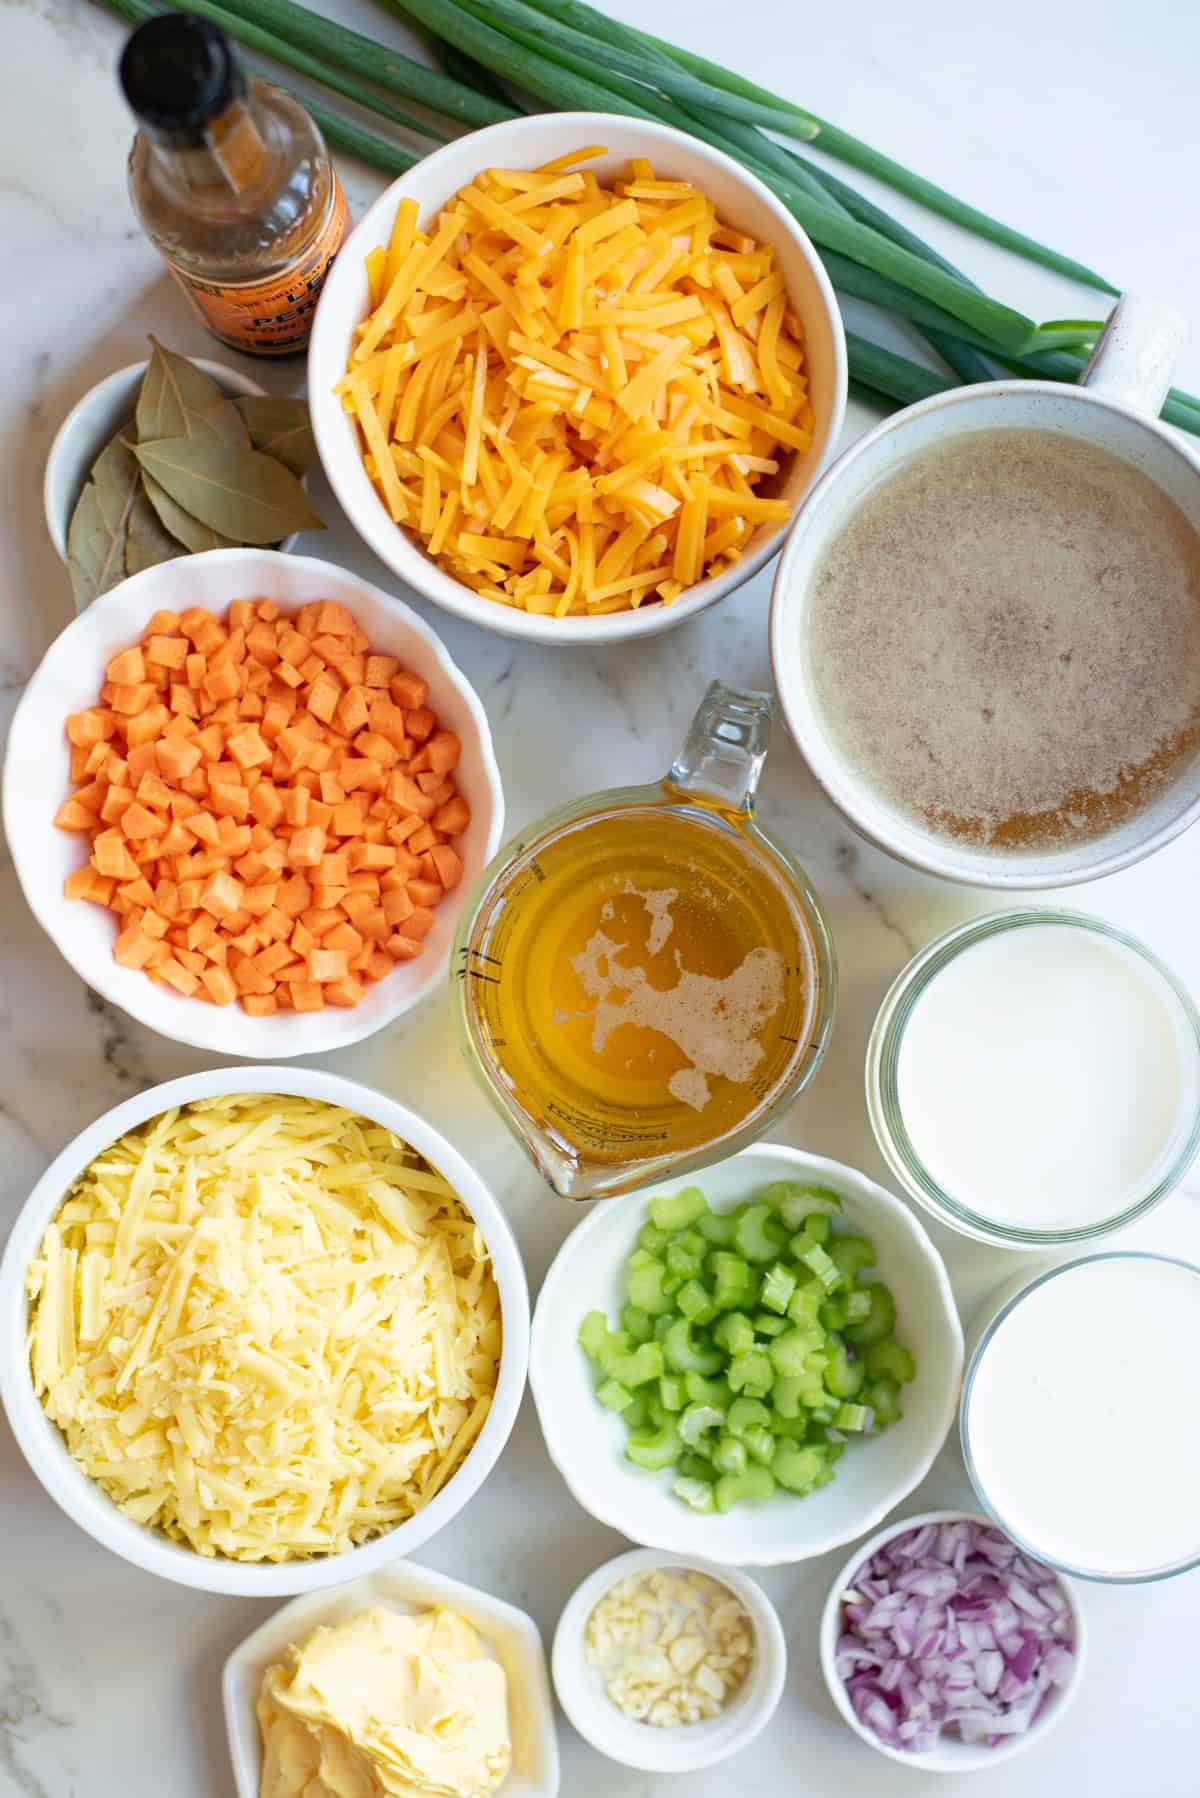 Ingredients for beer cheese soup